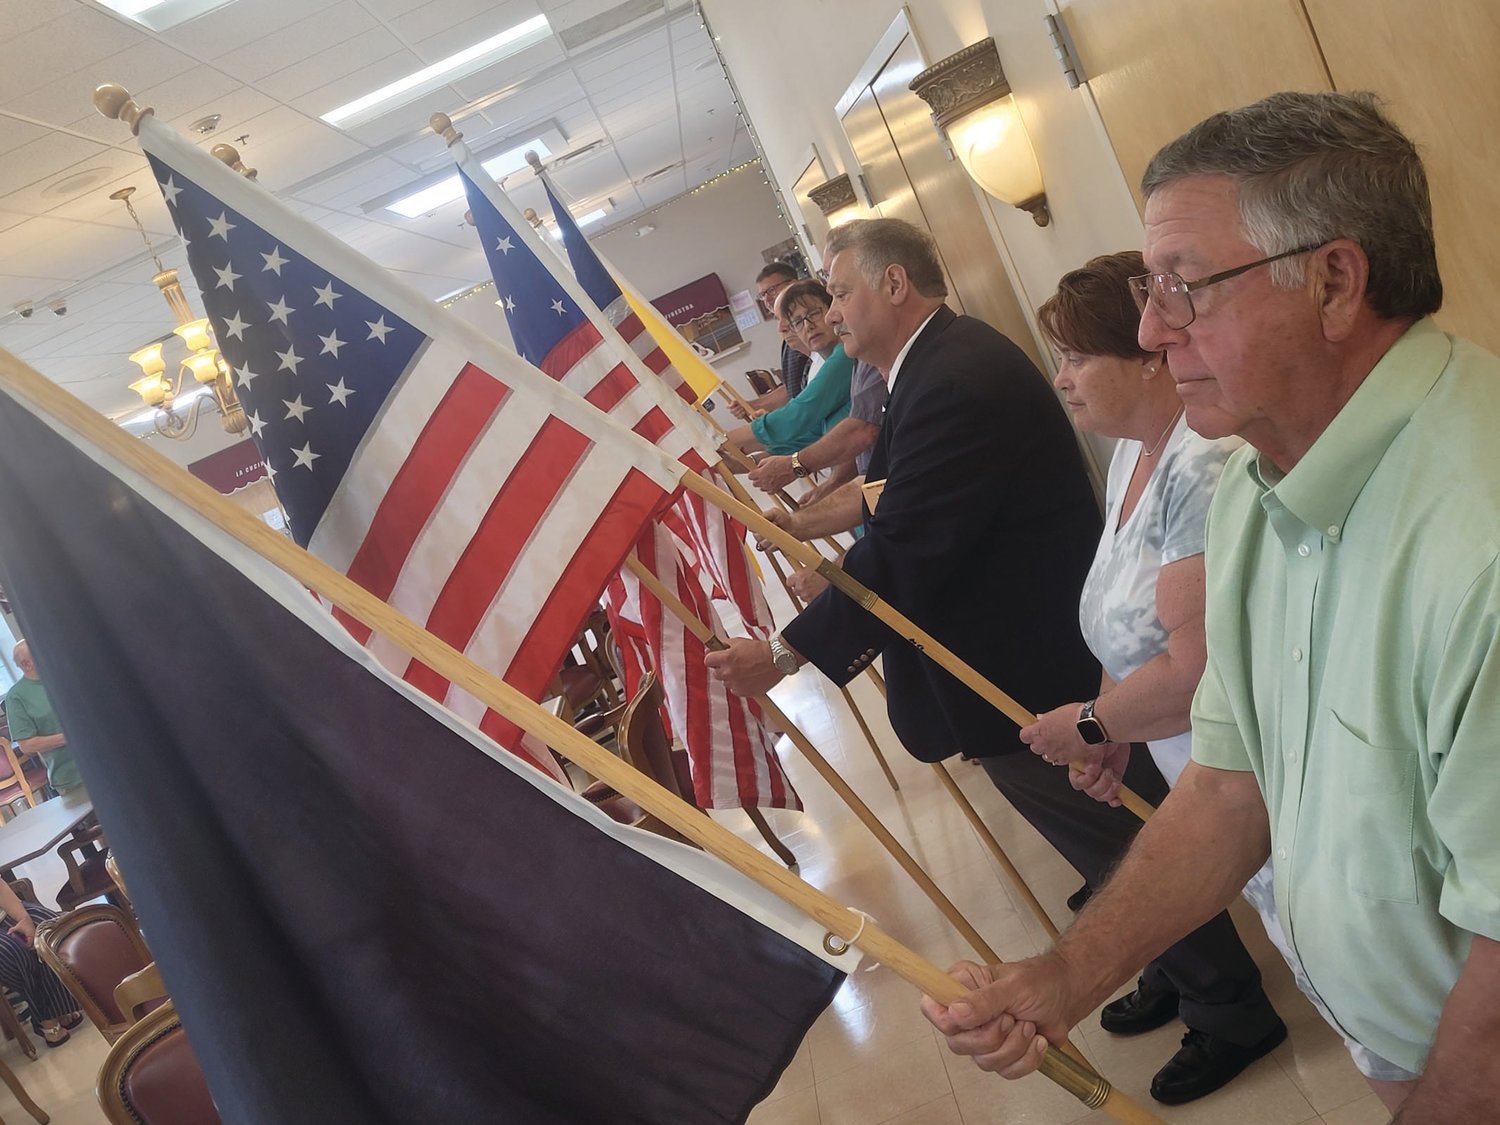 BANNERS UNITED: Members of Warwick’s Tri-City Elks Lodge held flags from throughout the American experience. From the original “Stars & Stripes” to an “MIA/POW” flag, patriotism was on full display during the Flag Day ceremony held at the Johnston Senior Center.  (Sun Rise photos by Rory Schuler)